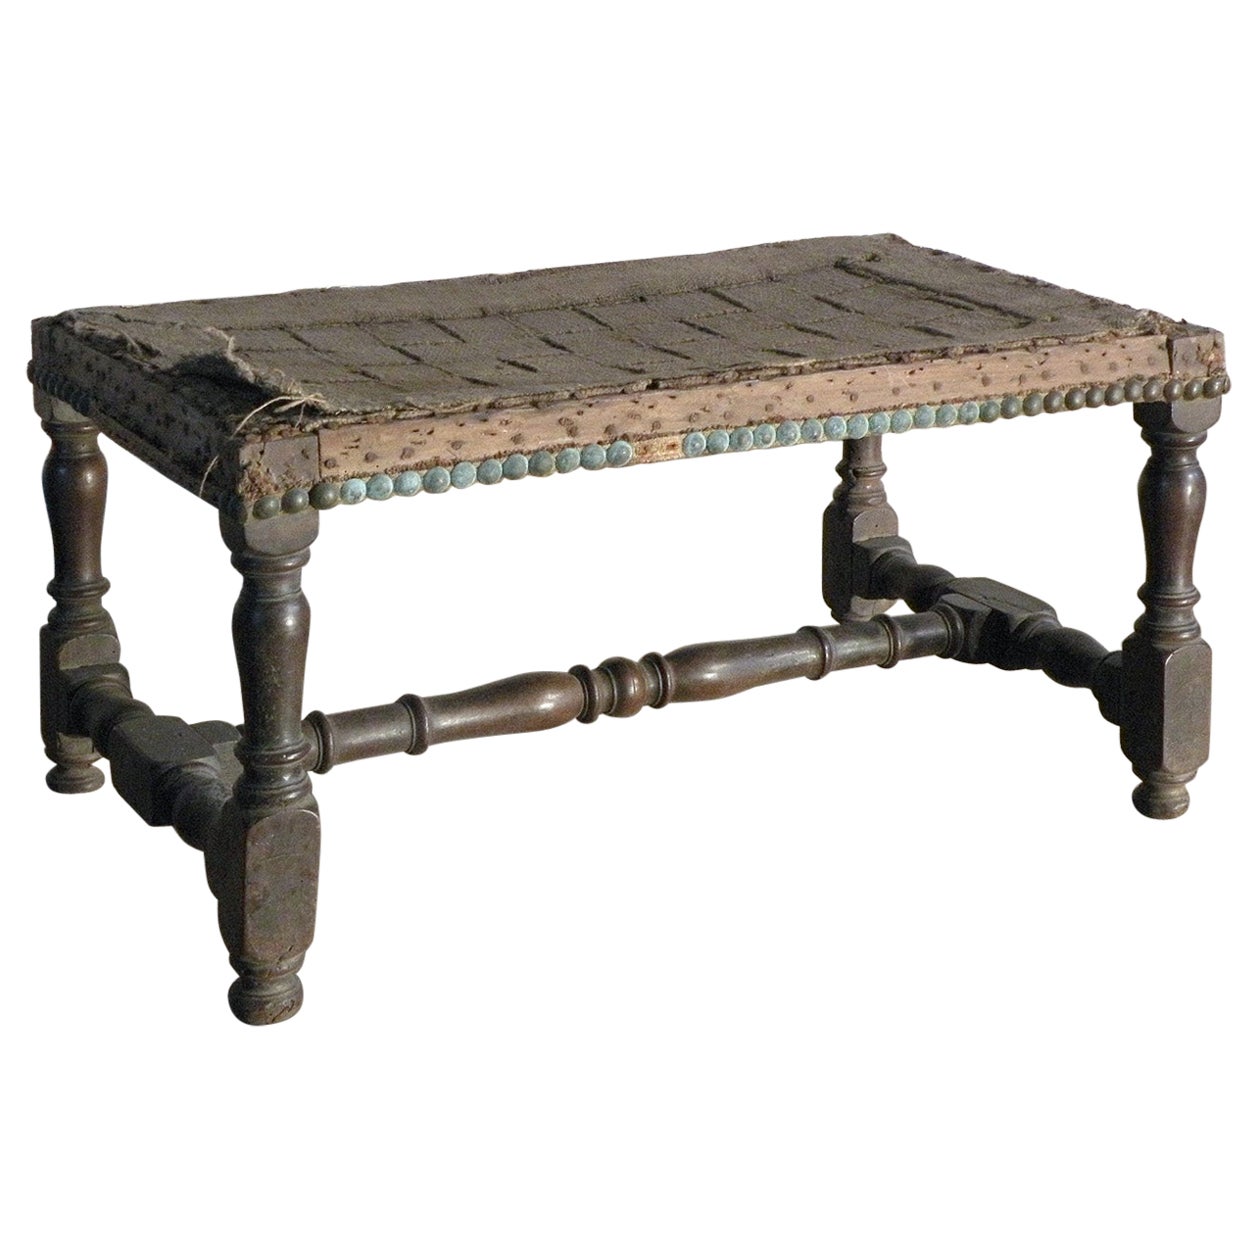 French Early 18th Century Baroque Walnut Bench / Footstool